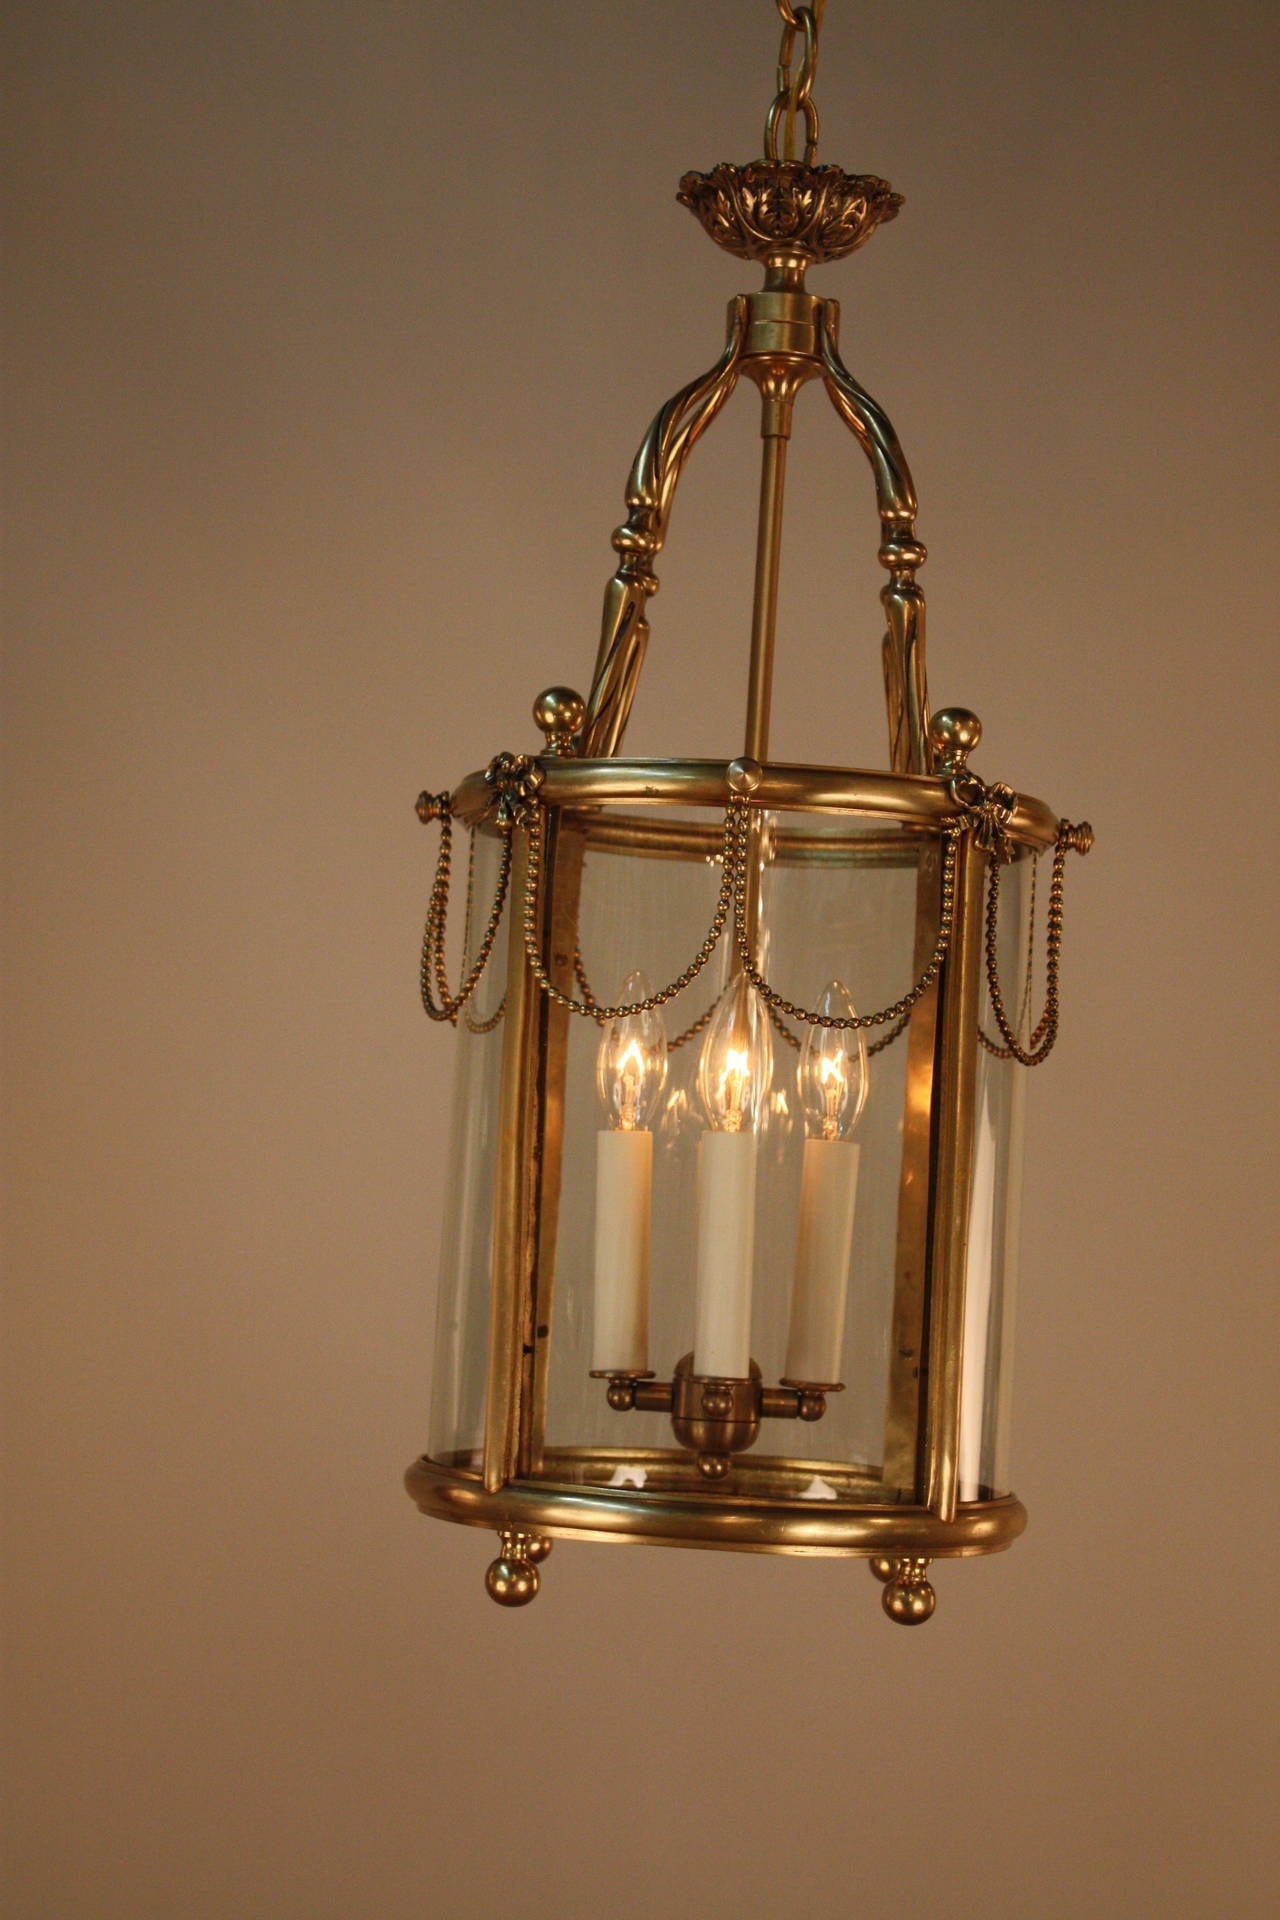 A simple yet elegant four-light fixture. Crafted in France during the 1930s, this hanging lantern features a Classic bronze design.